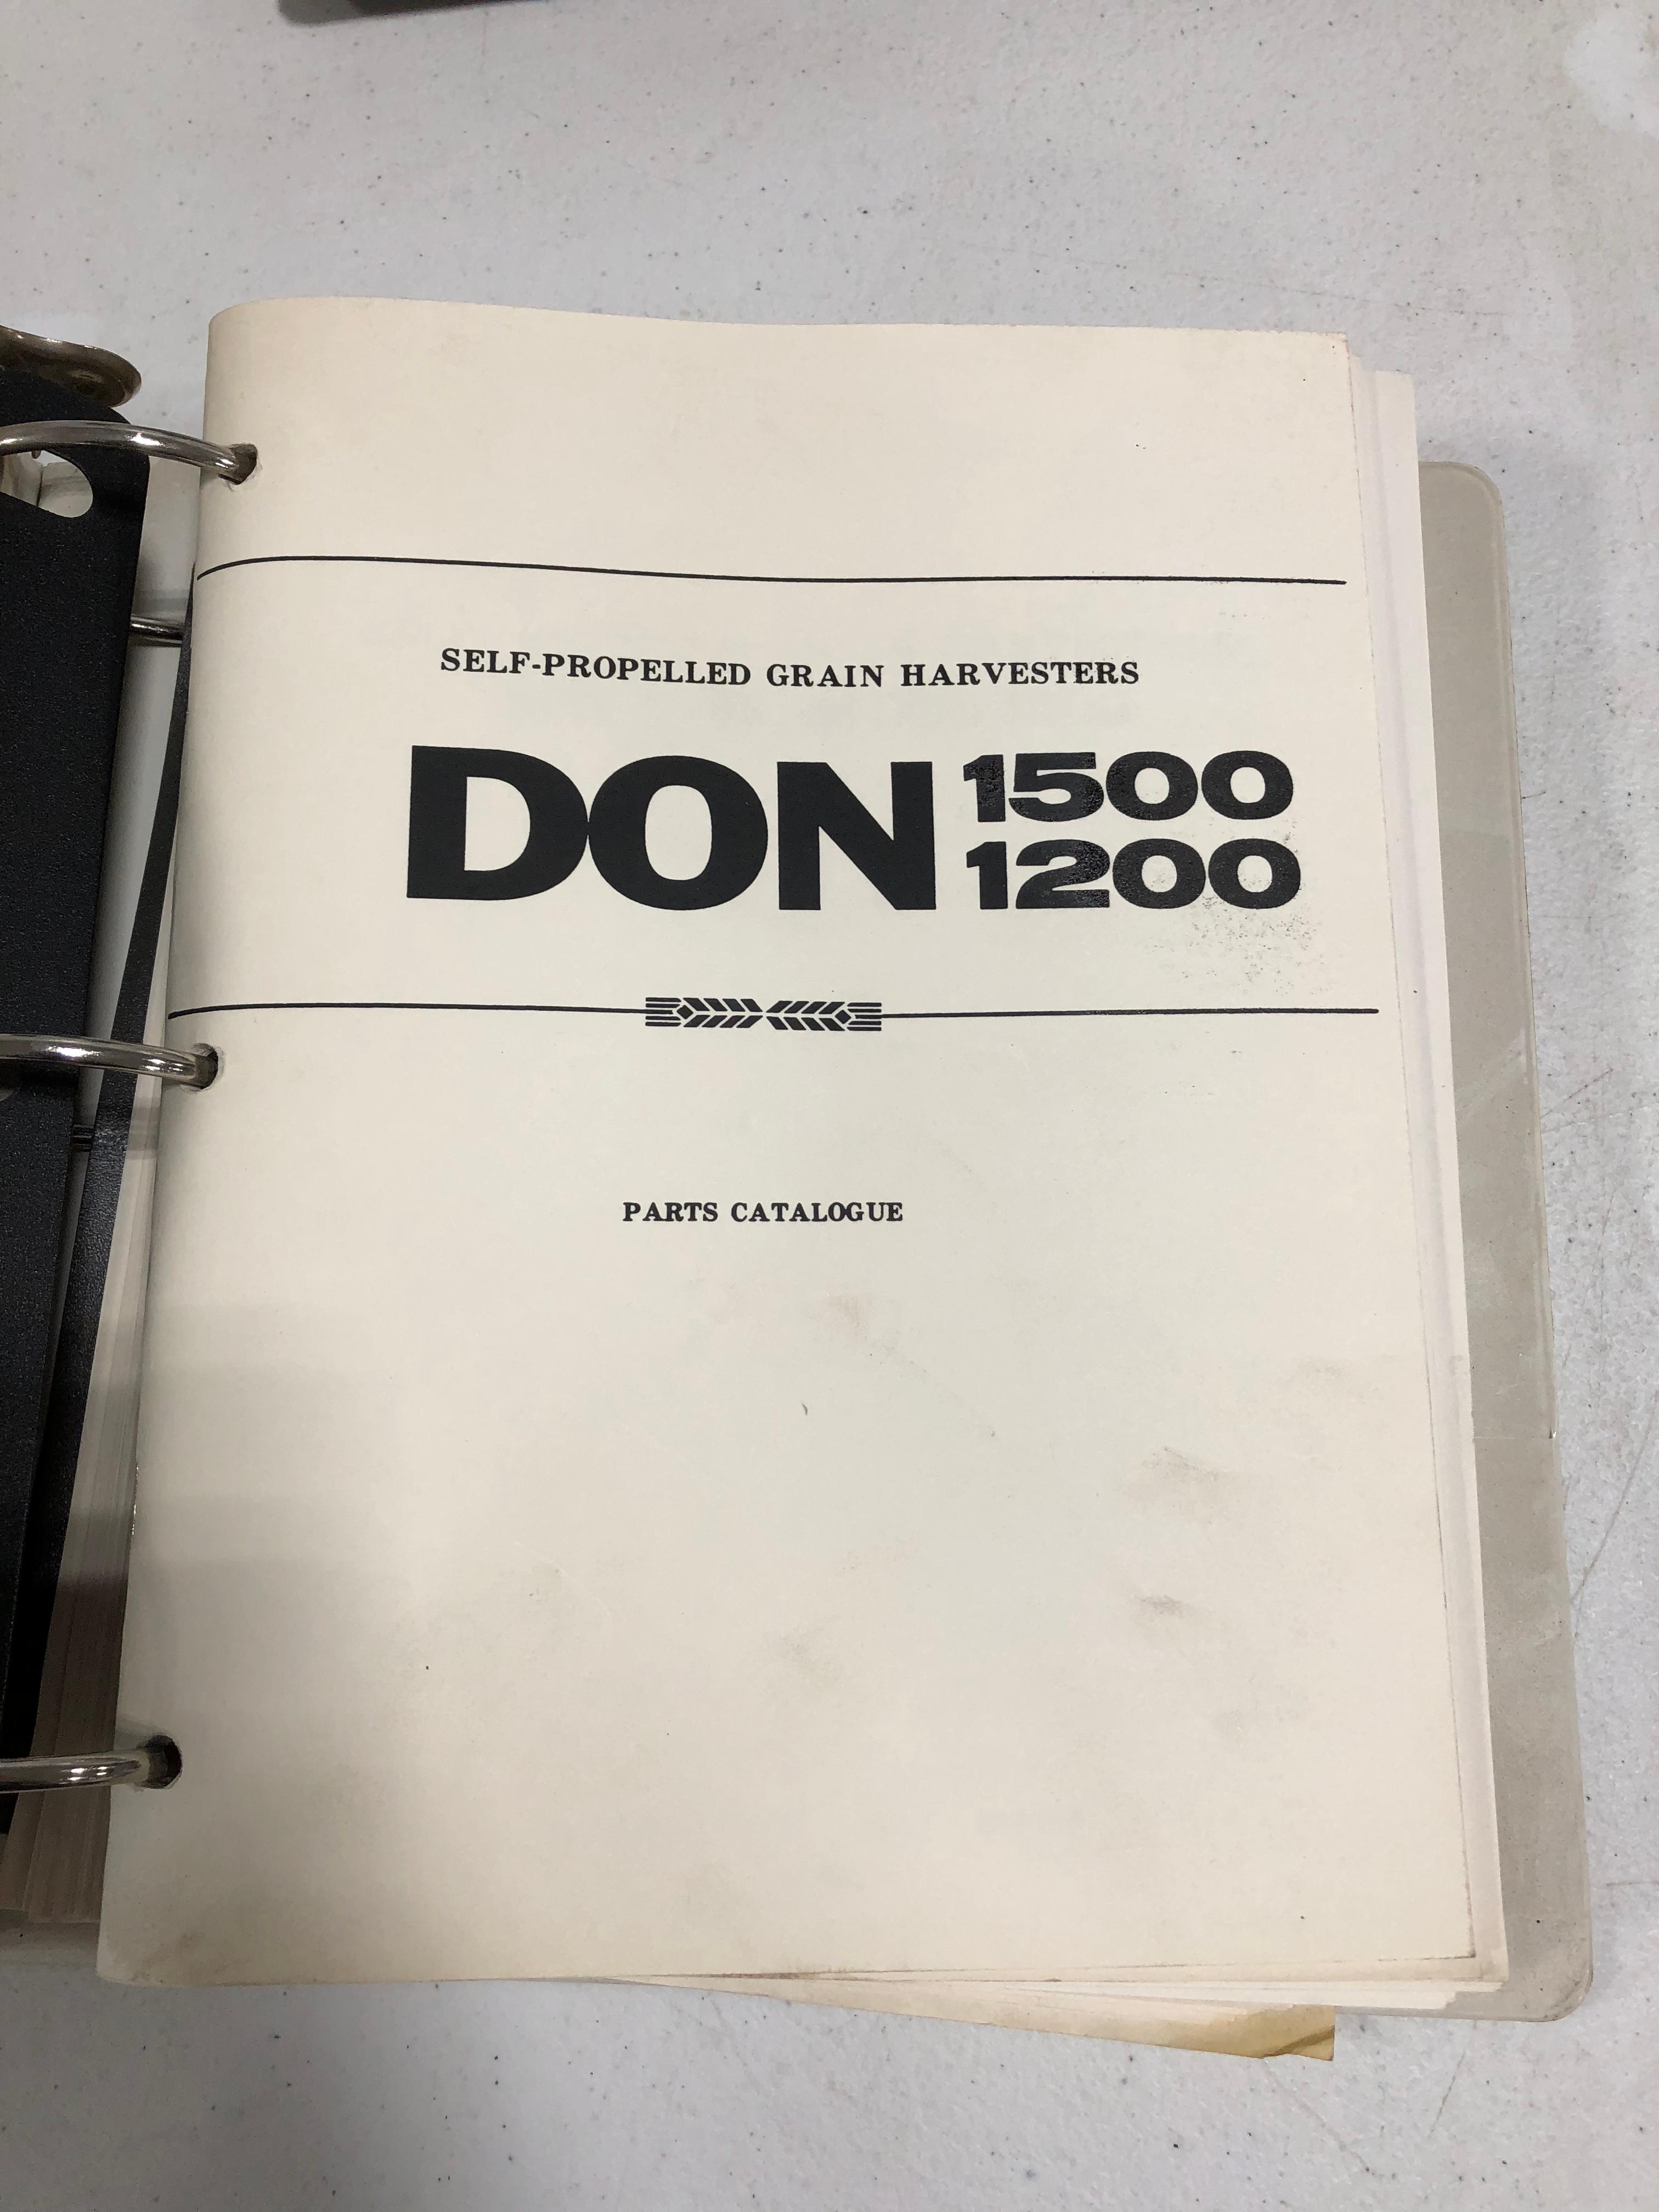 DON 1200&1500 SELF-PROPELLED GRAIN HARVESTERS PARTS CATALOGUE